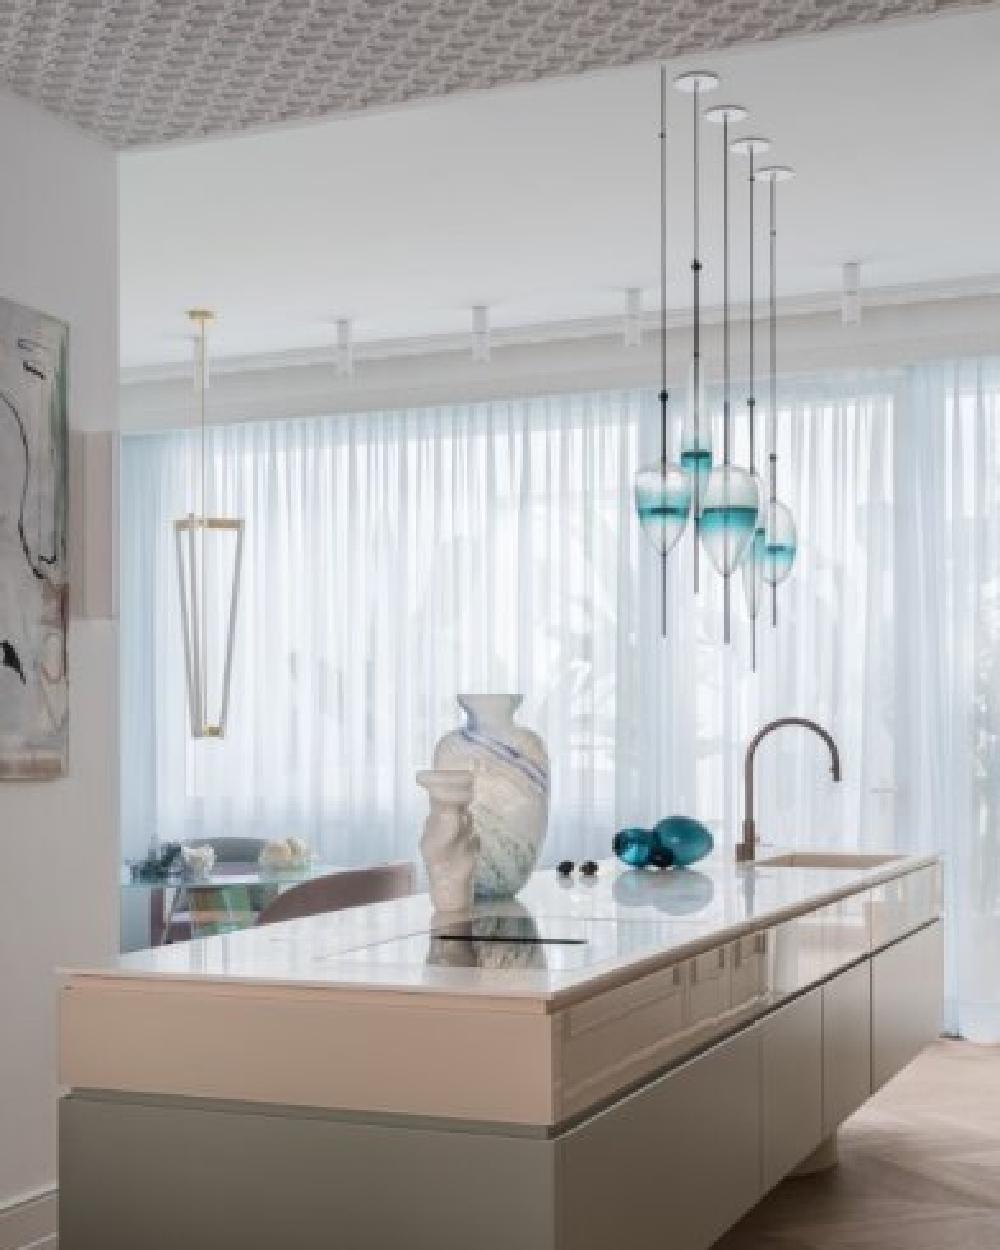 FLOW[T] S1 Pendant lamp in Turquoise by Nao Tamura for Wonderglass For Sale 2